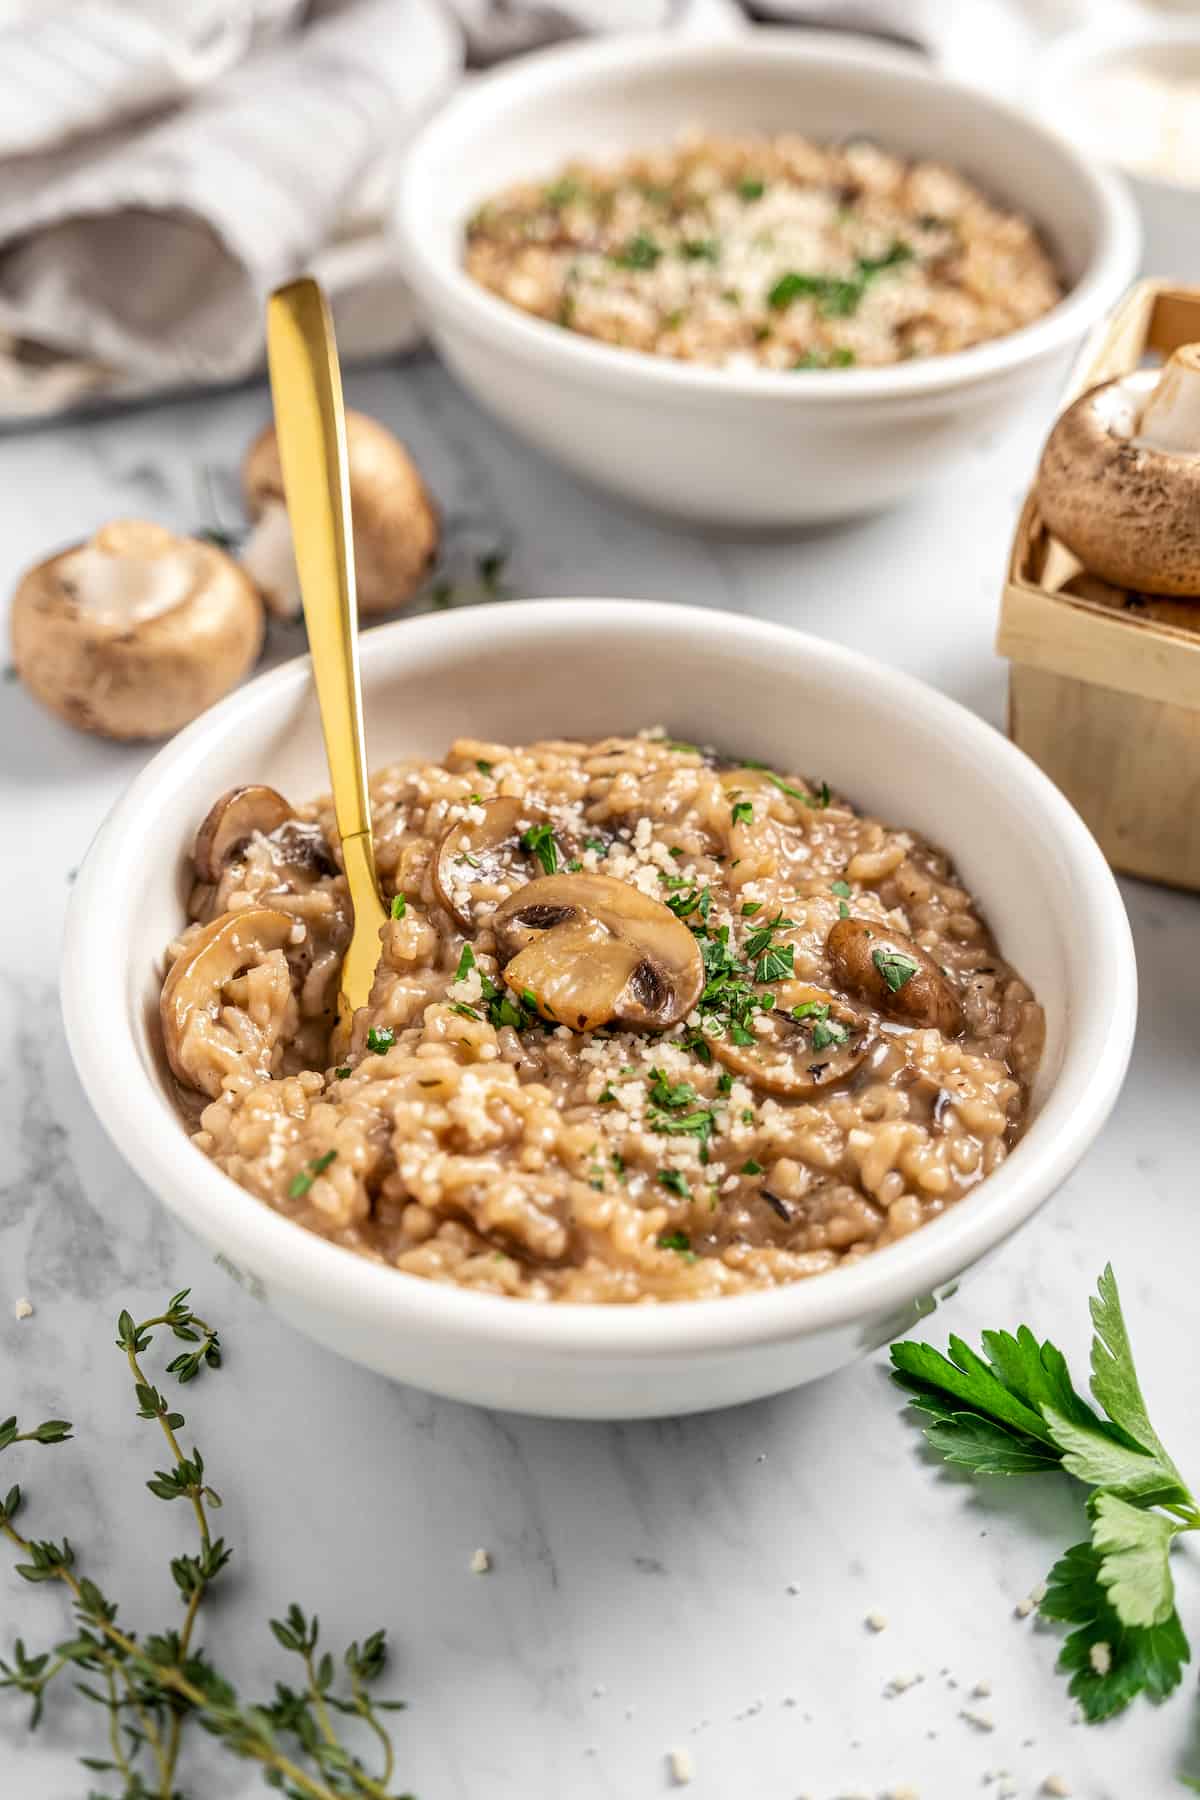 Two bowls of vegan Instant Pot risotto with mushrooms, with fresh herbs and mushrooms on tabletop